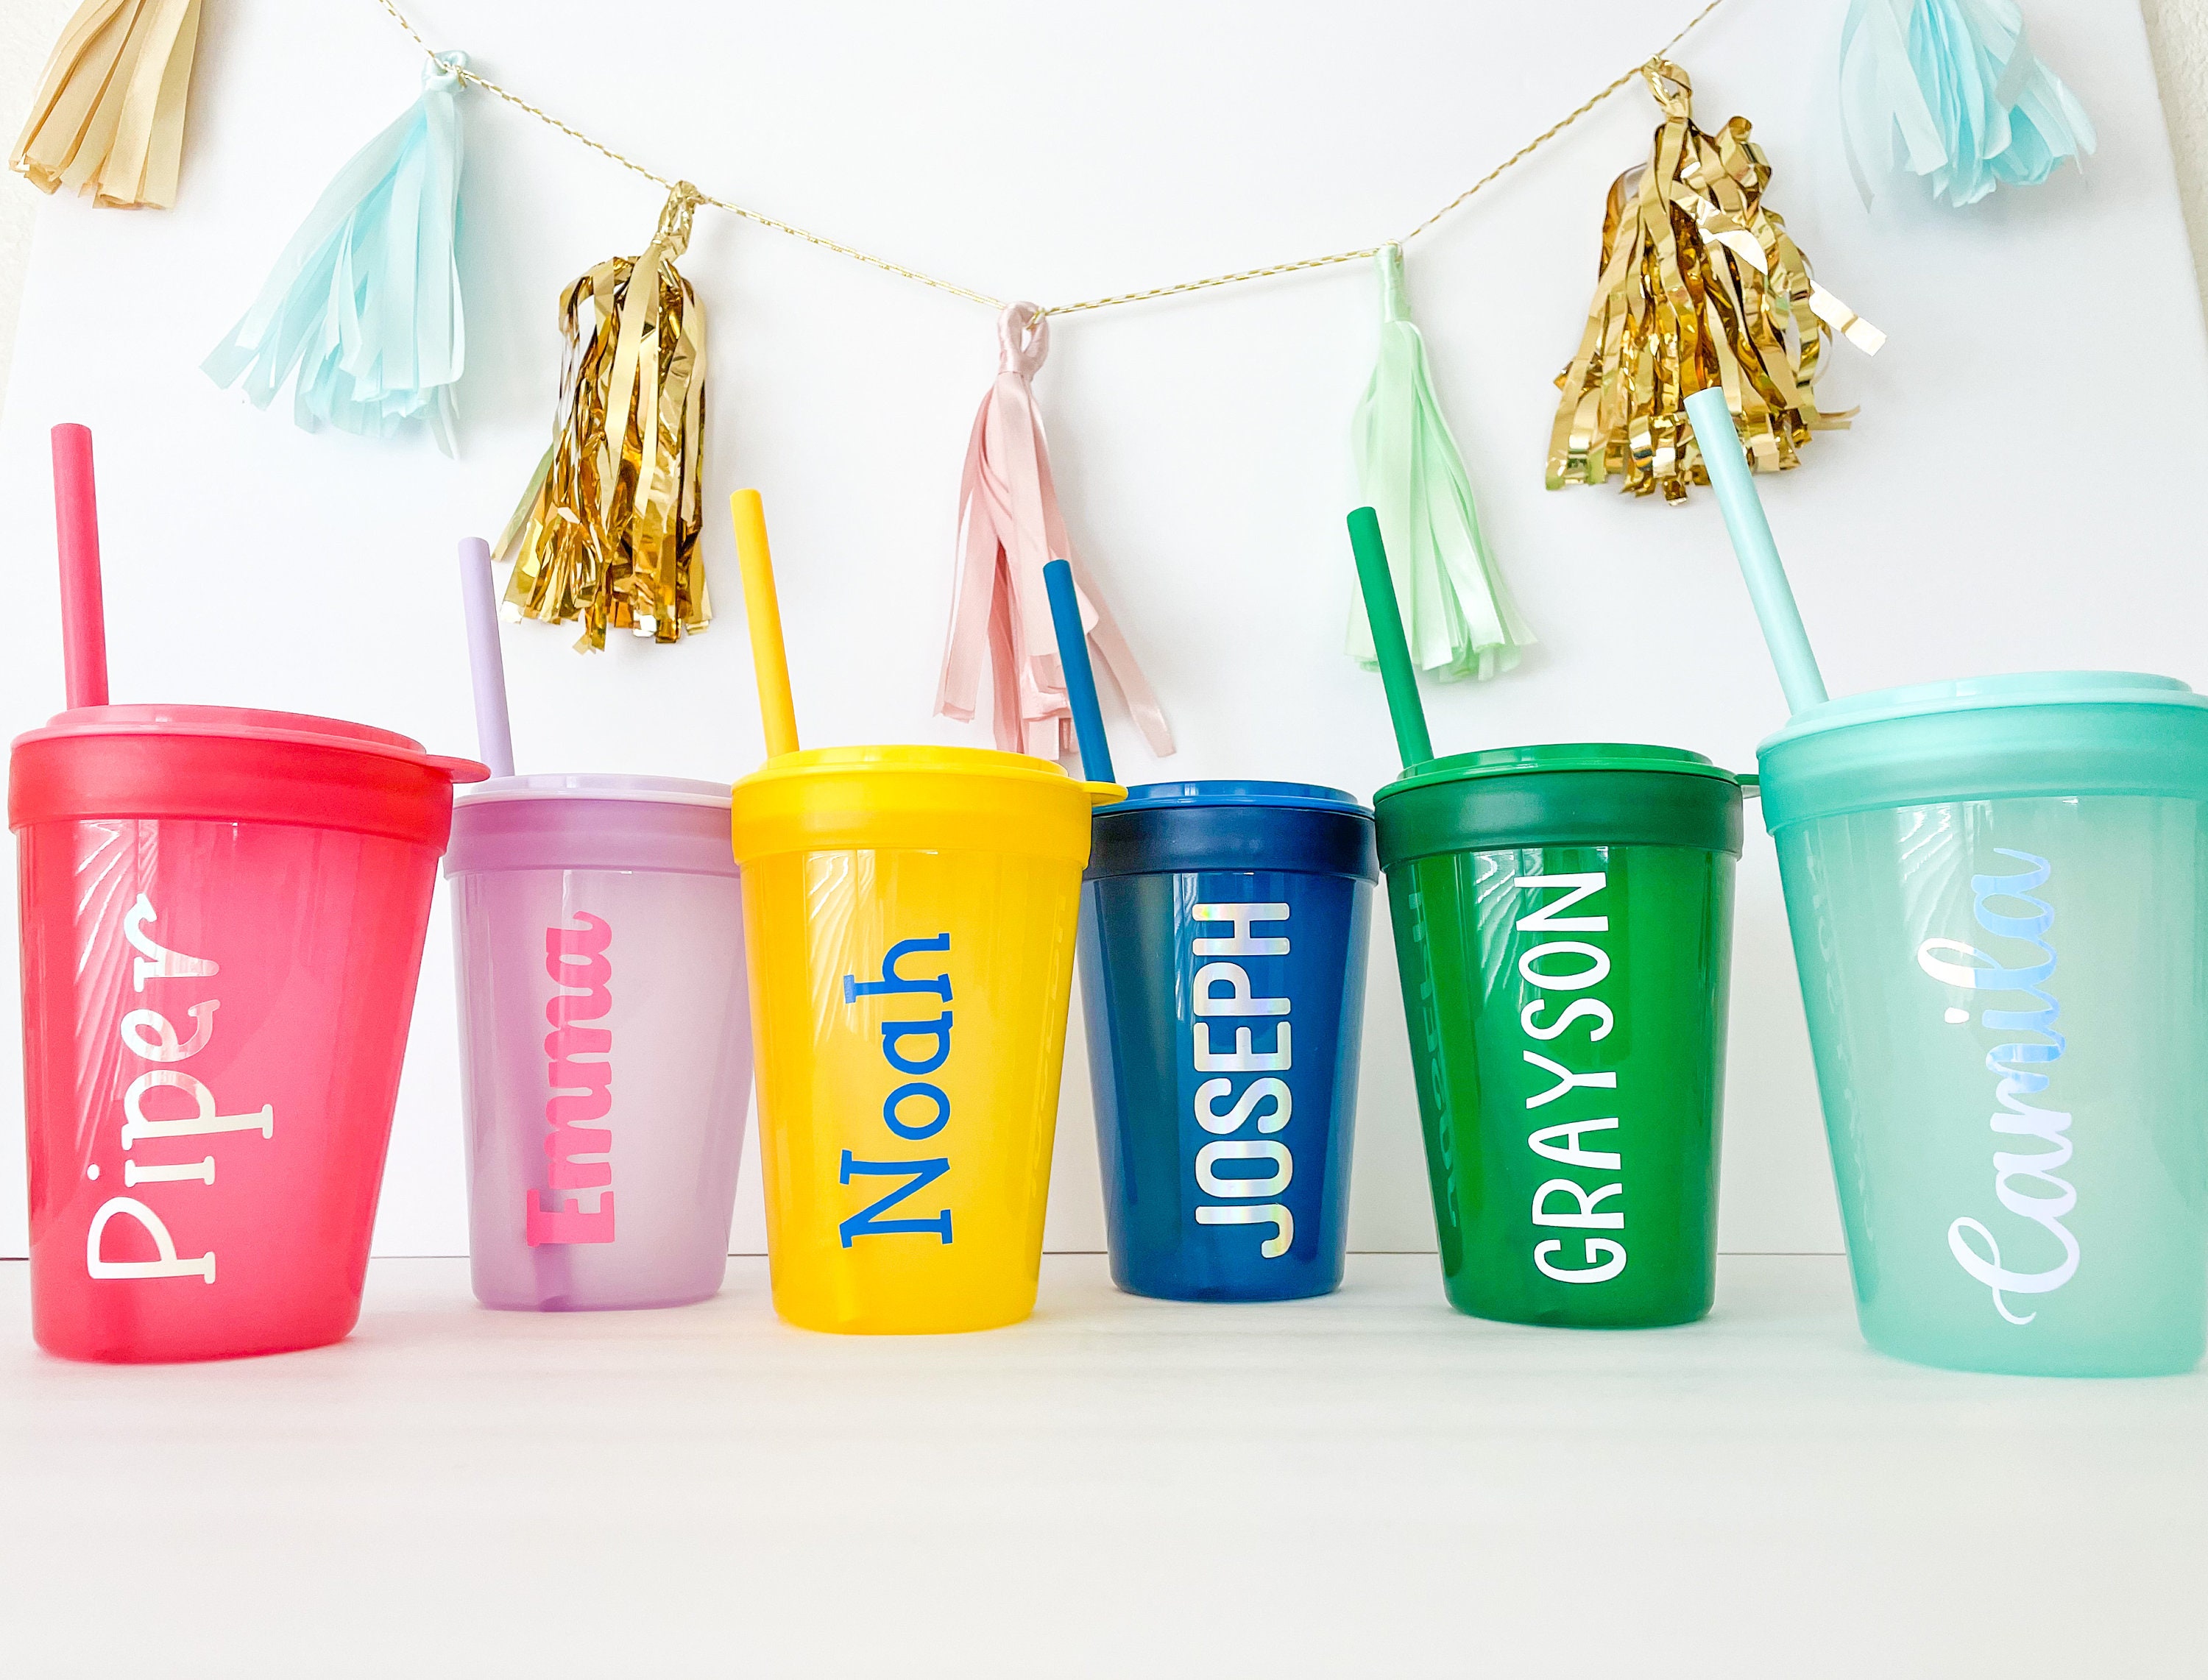 Personalized Kids Cup With Lid and Straw, Birthday Cups, Party